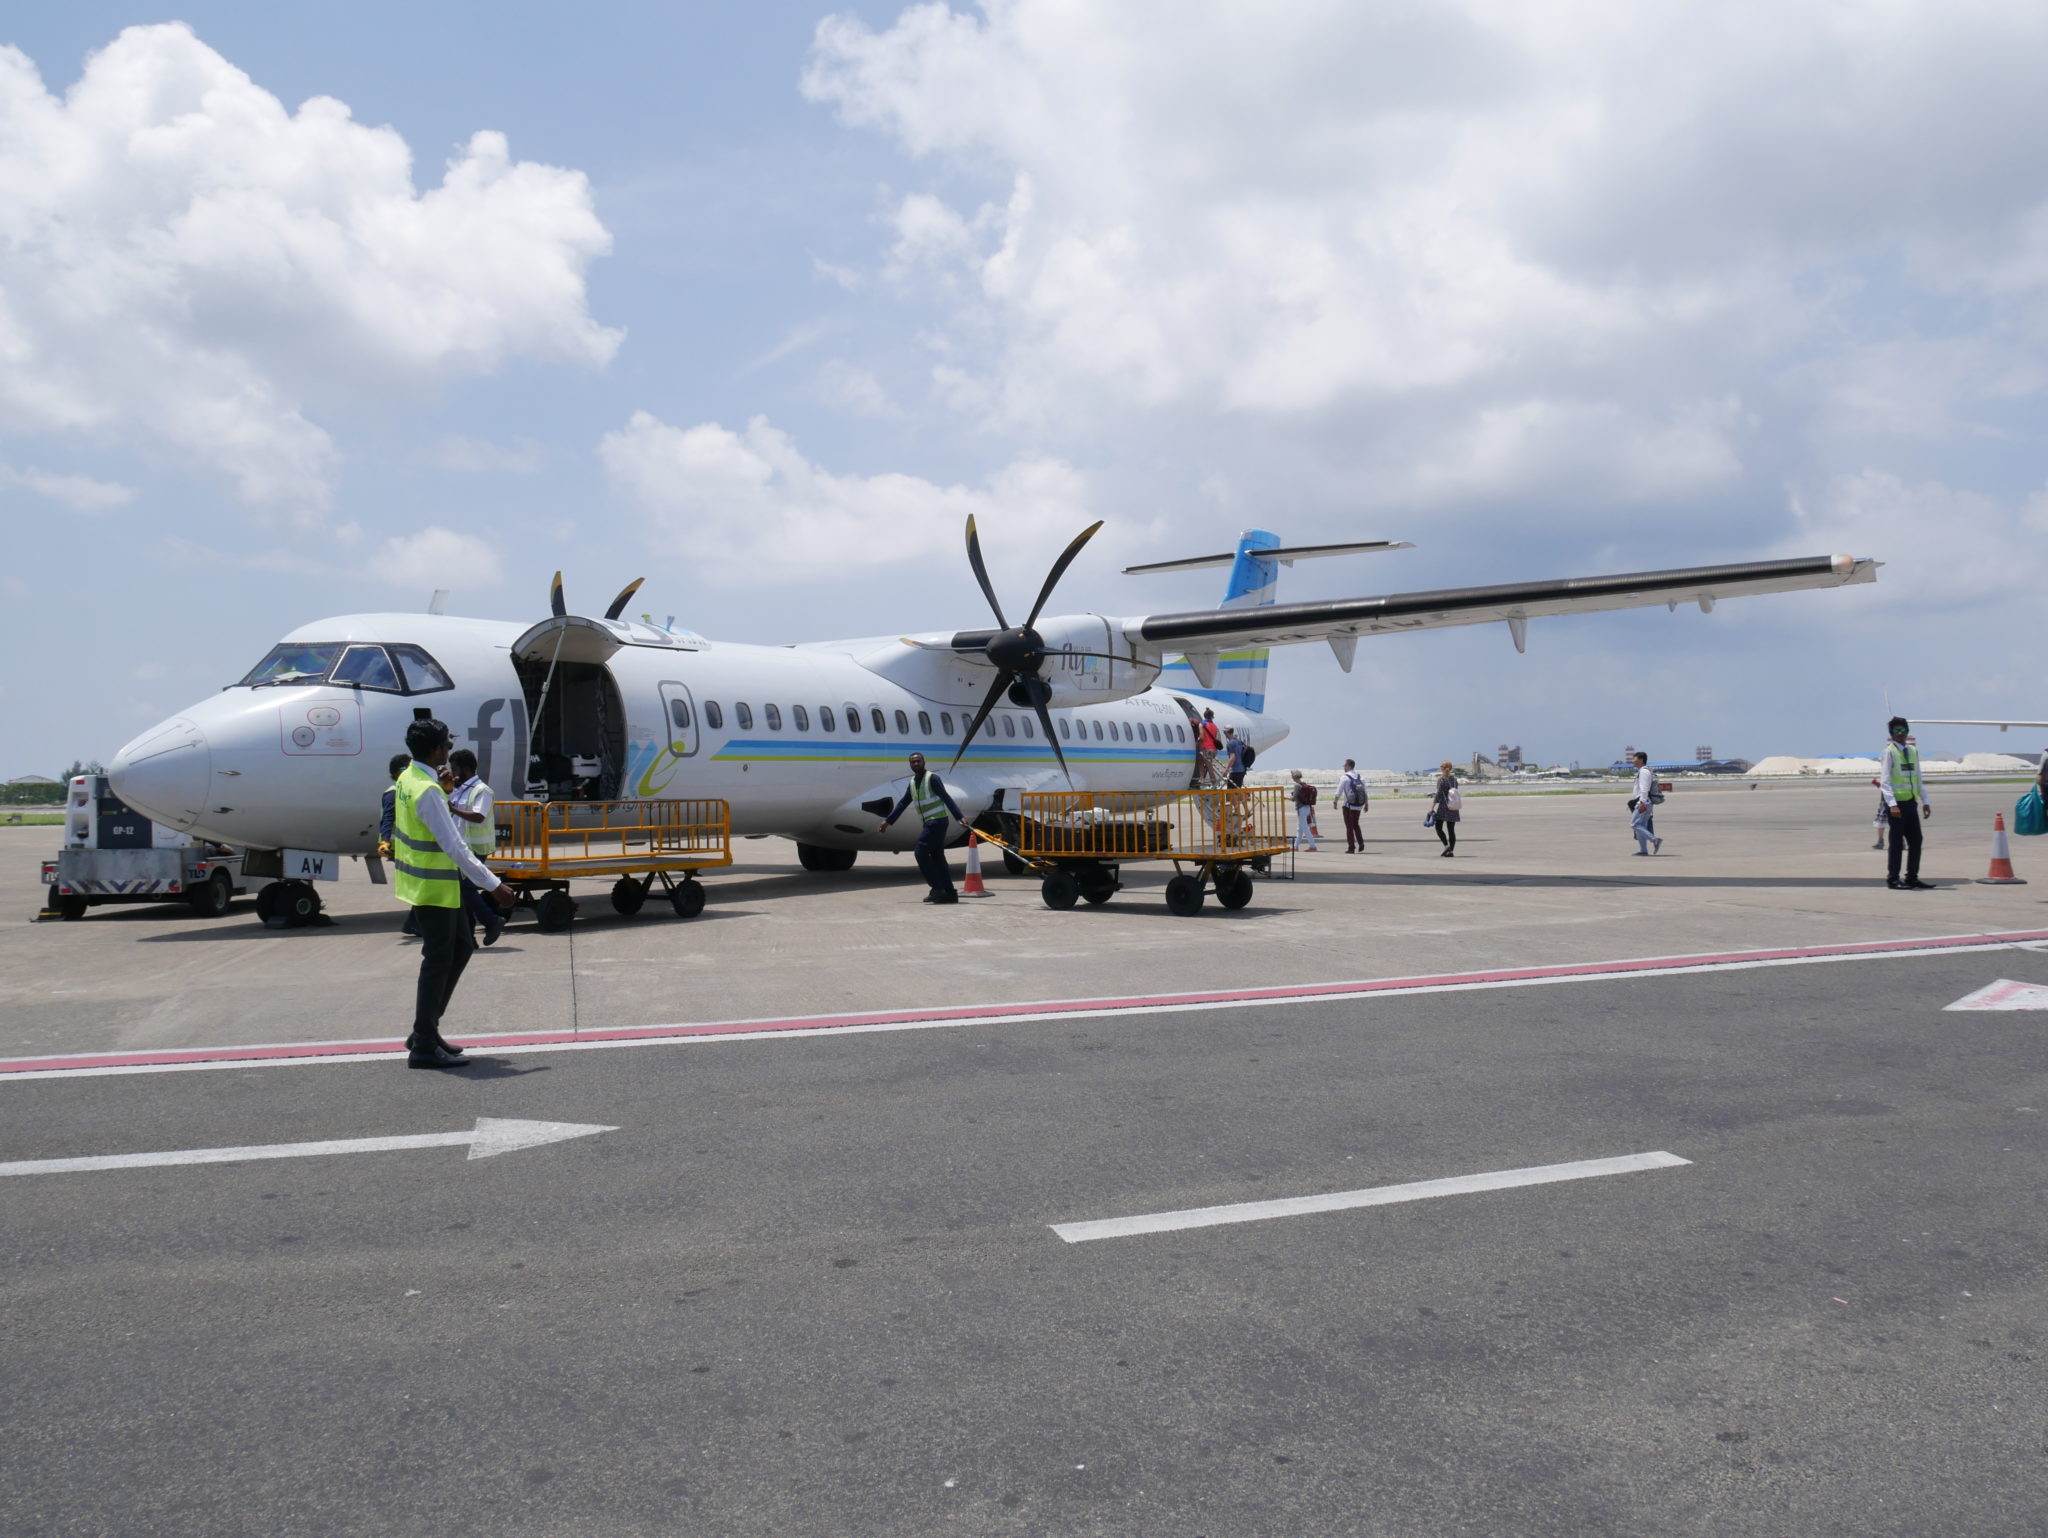 Flyme ATR 72-500 on the tarmac as passengers board the rear door